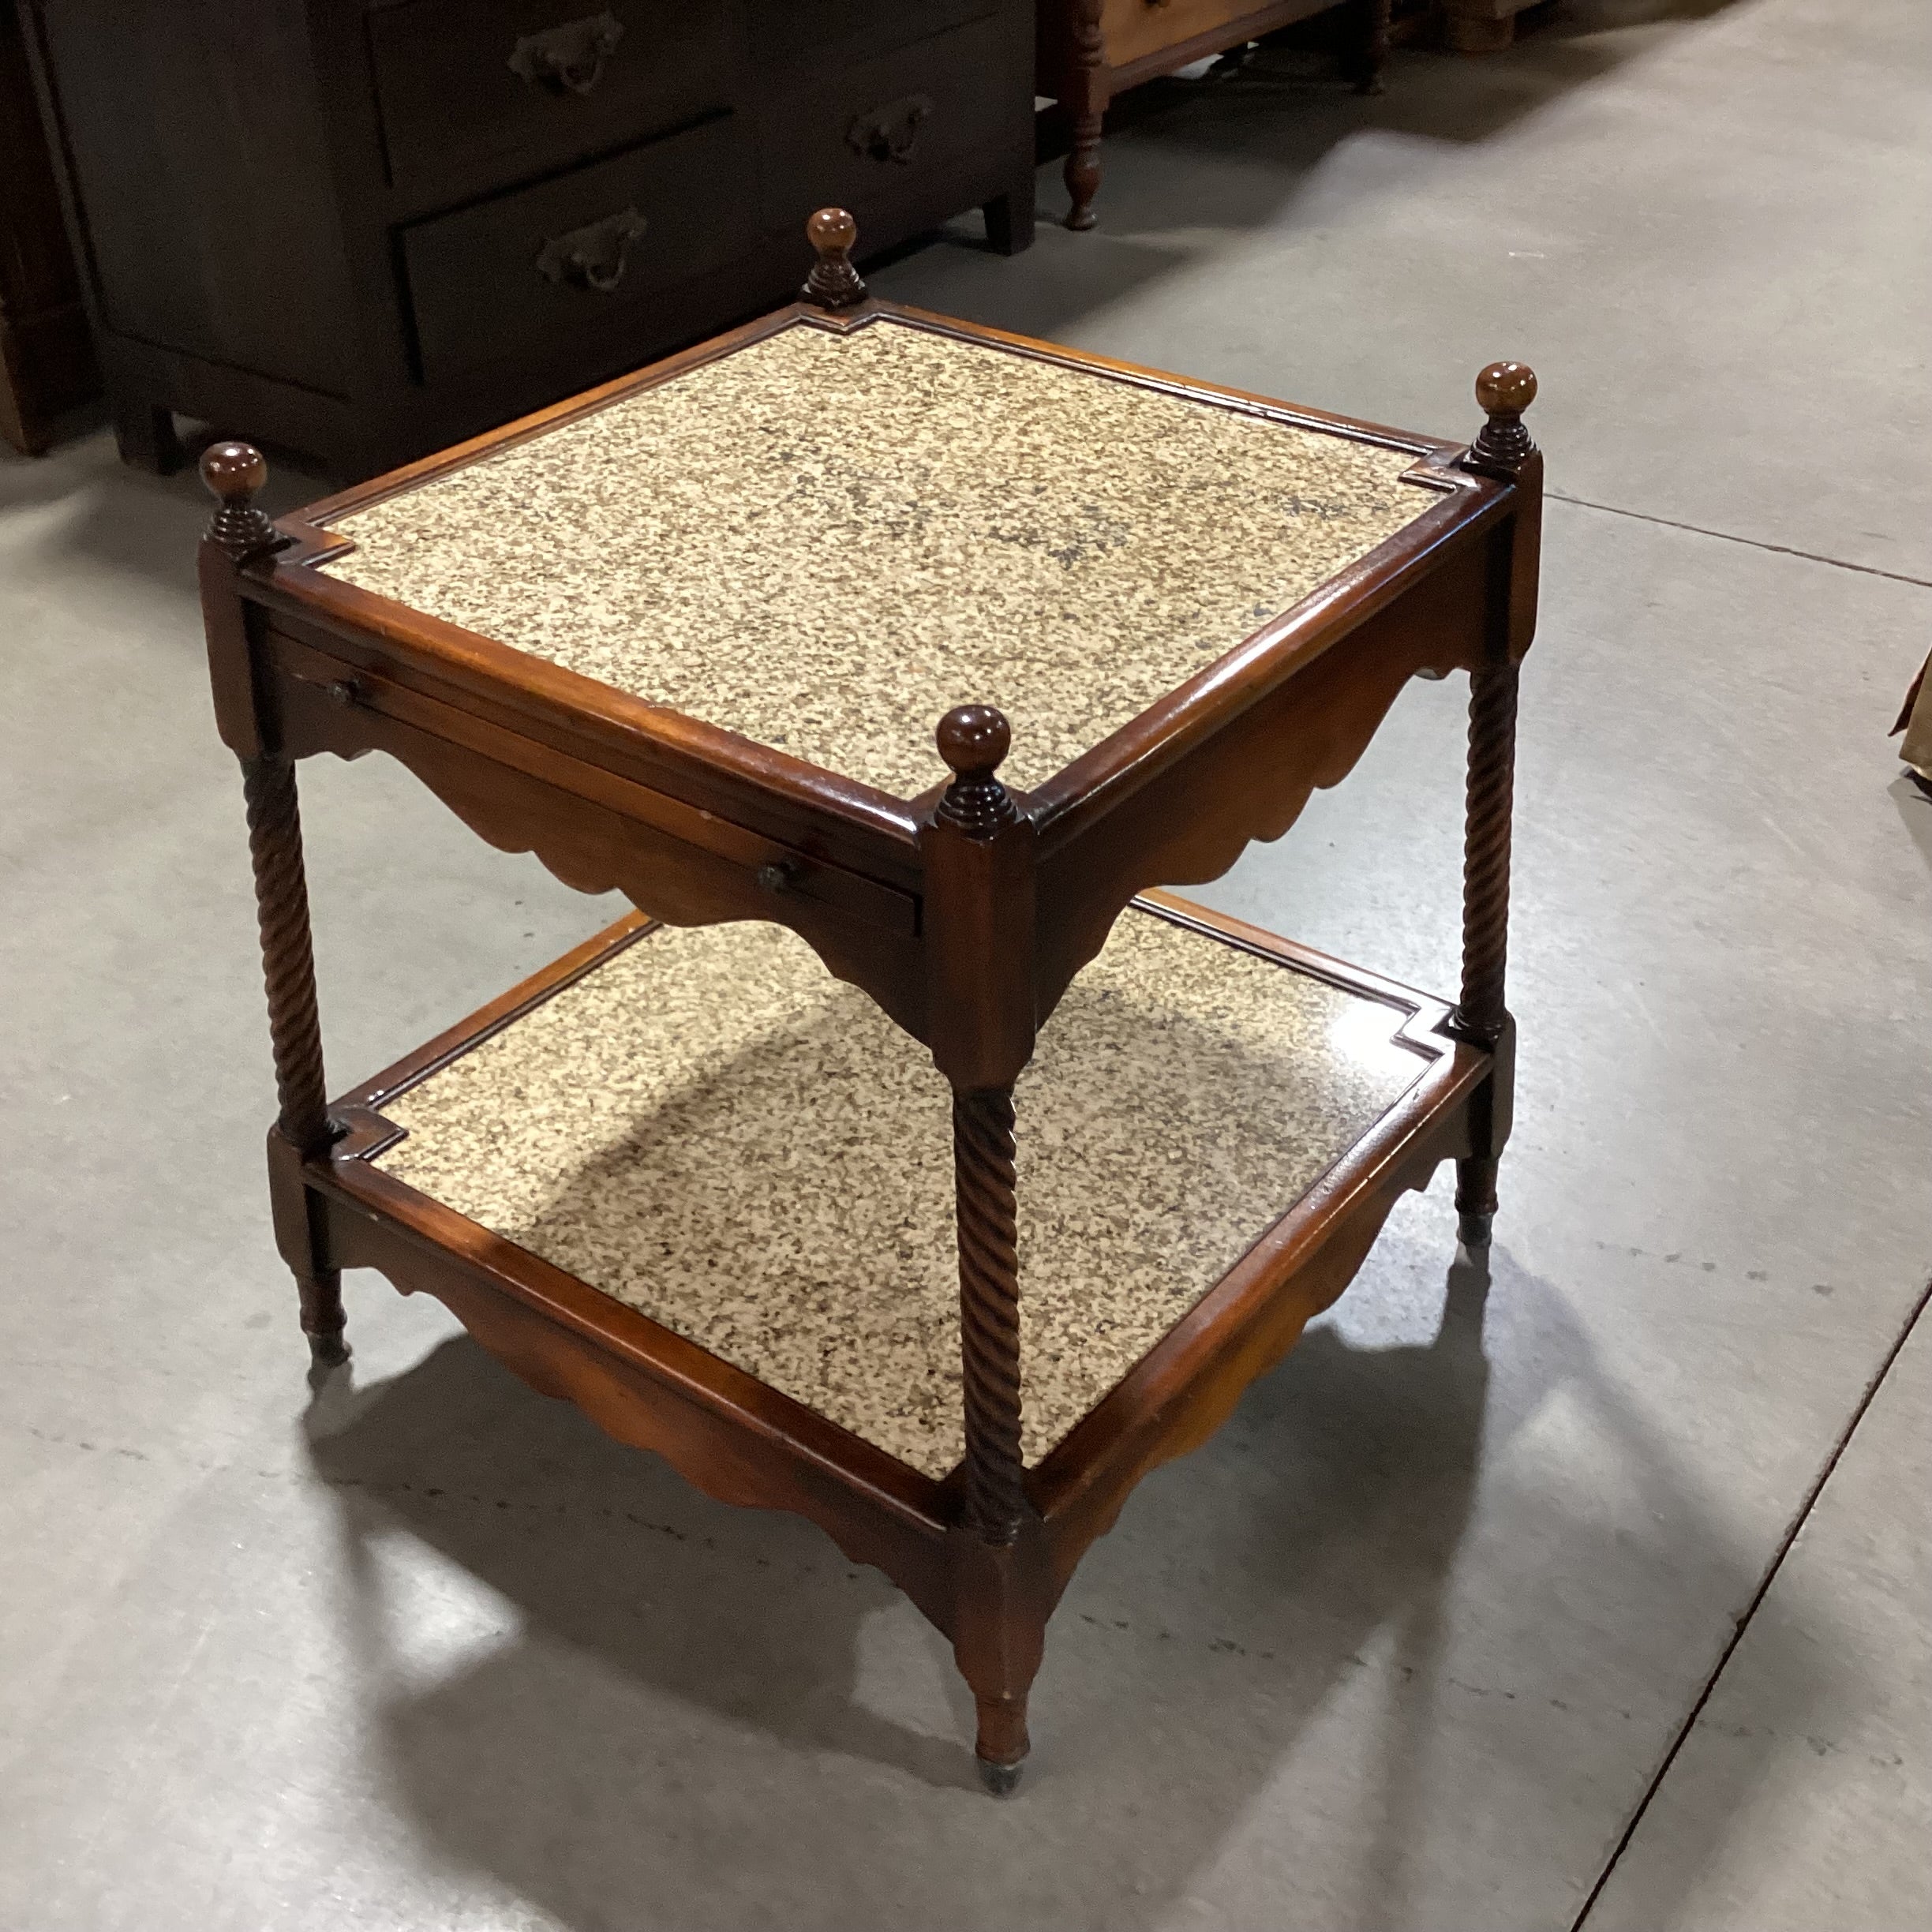 Spindle Carved wood & Granite 2 Tiered Accent Table 24"x 24"x 27"